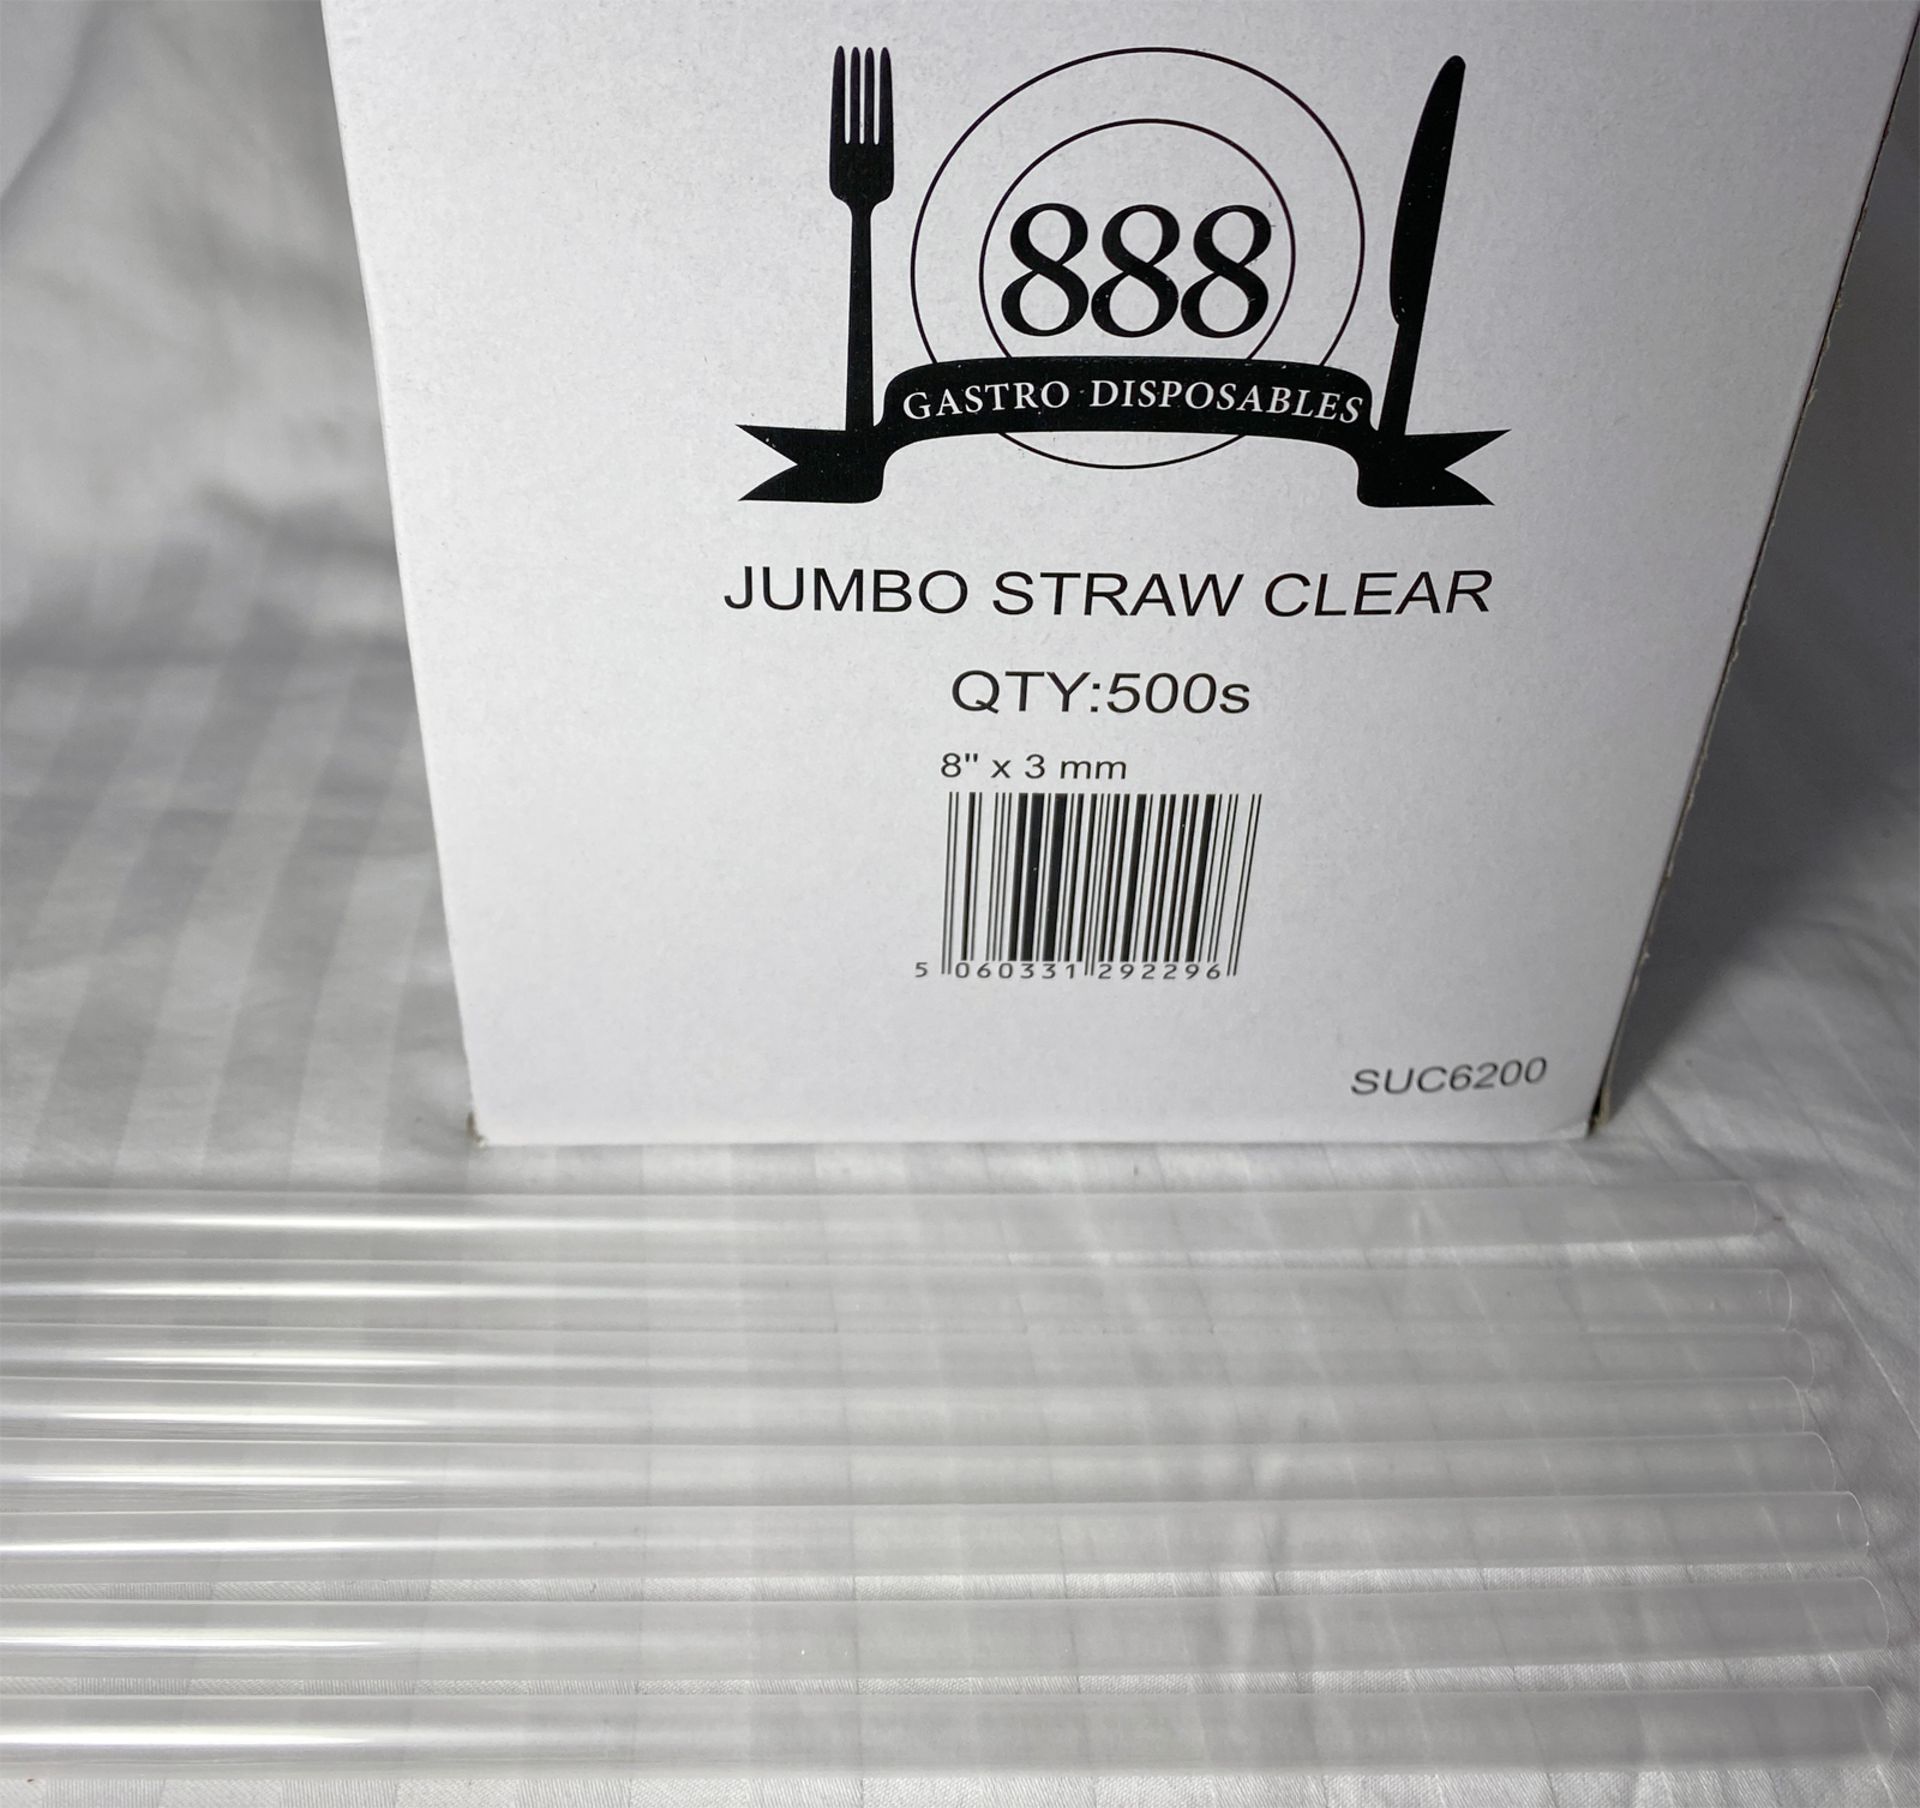 5 x Boxes of Jumbo Straws by 888 Gastro Disposables - Image 2 of 2